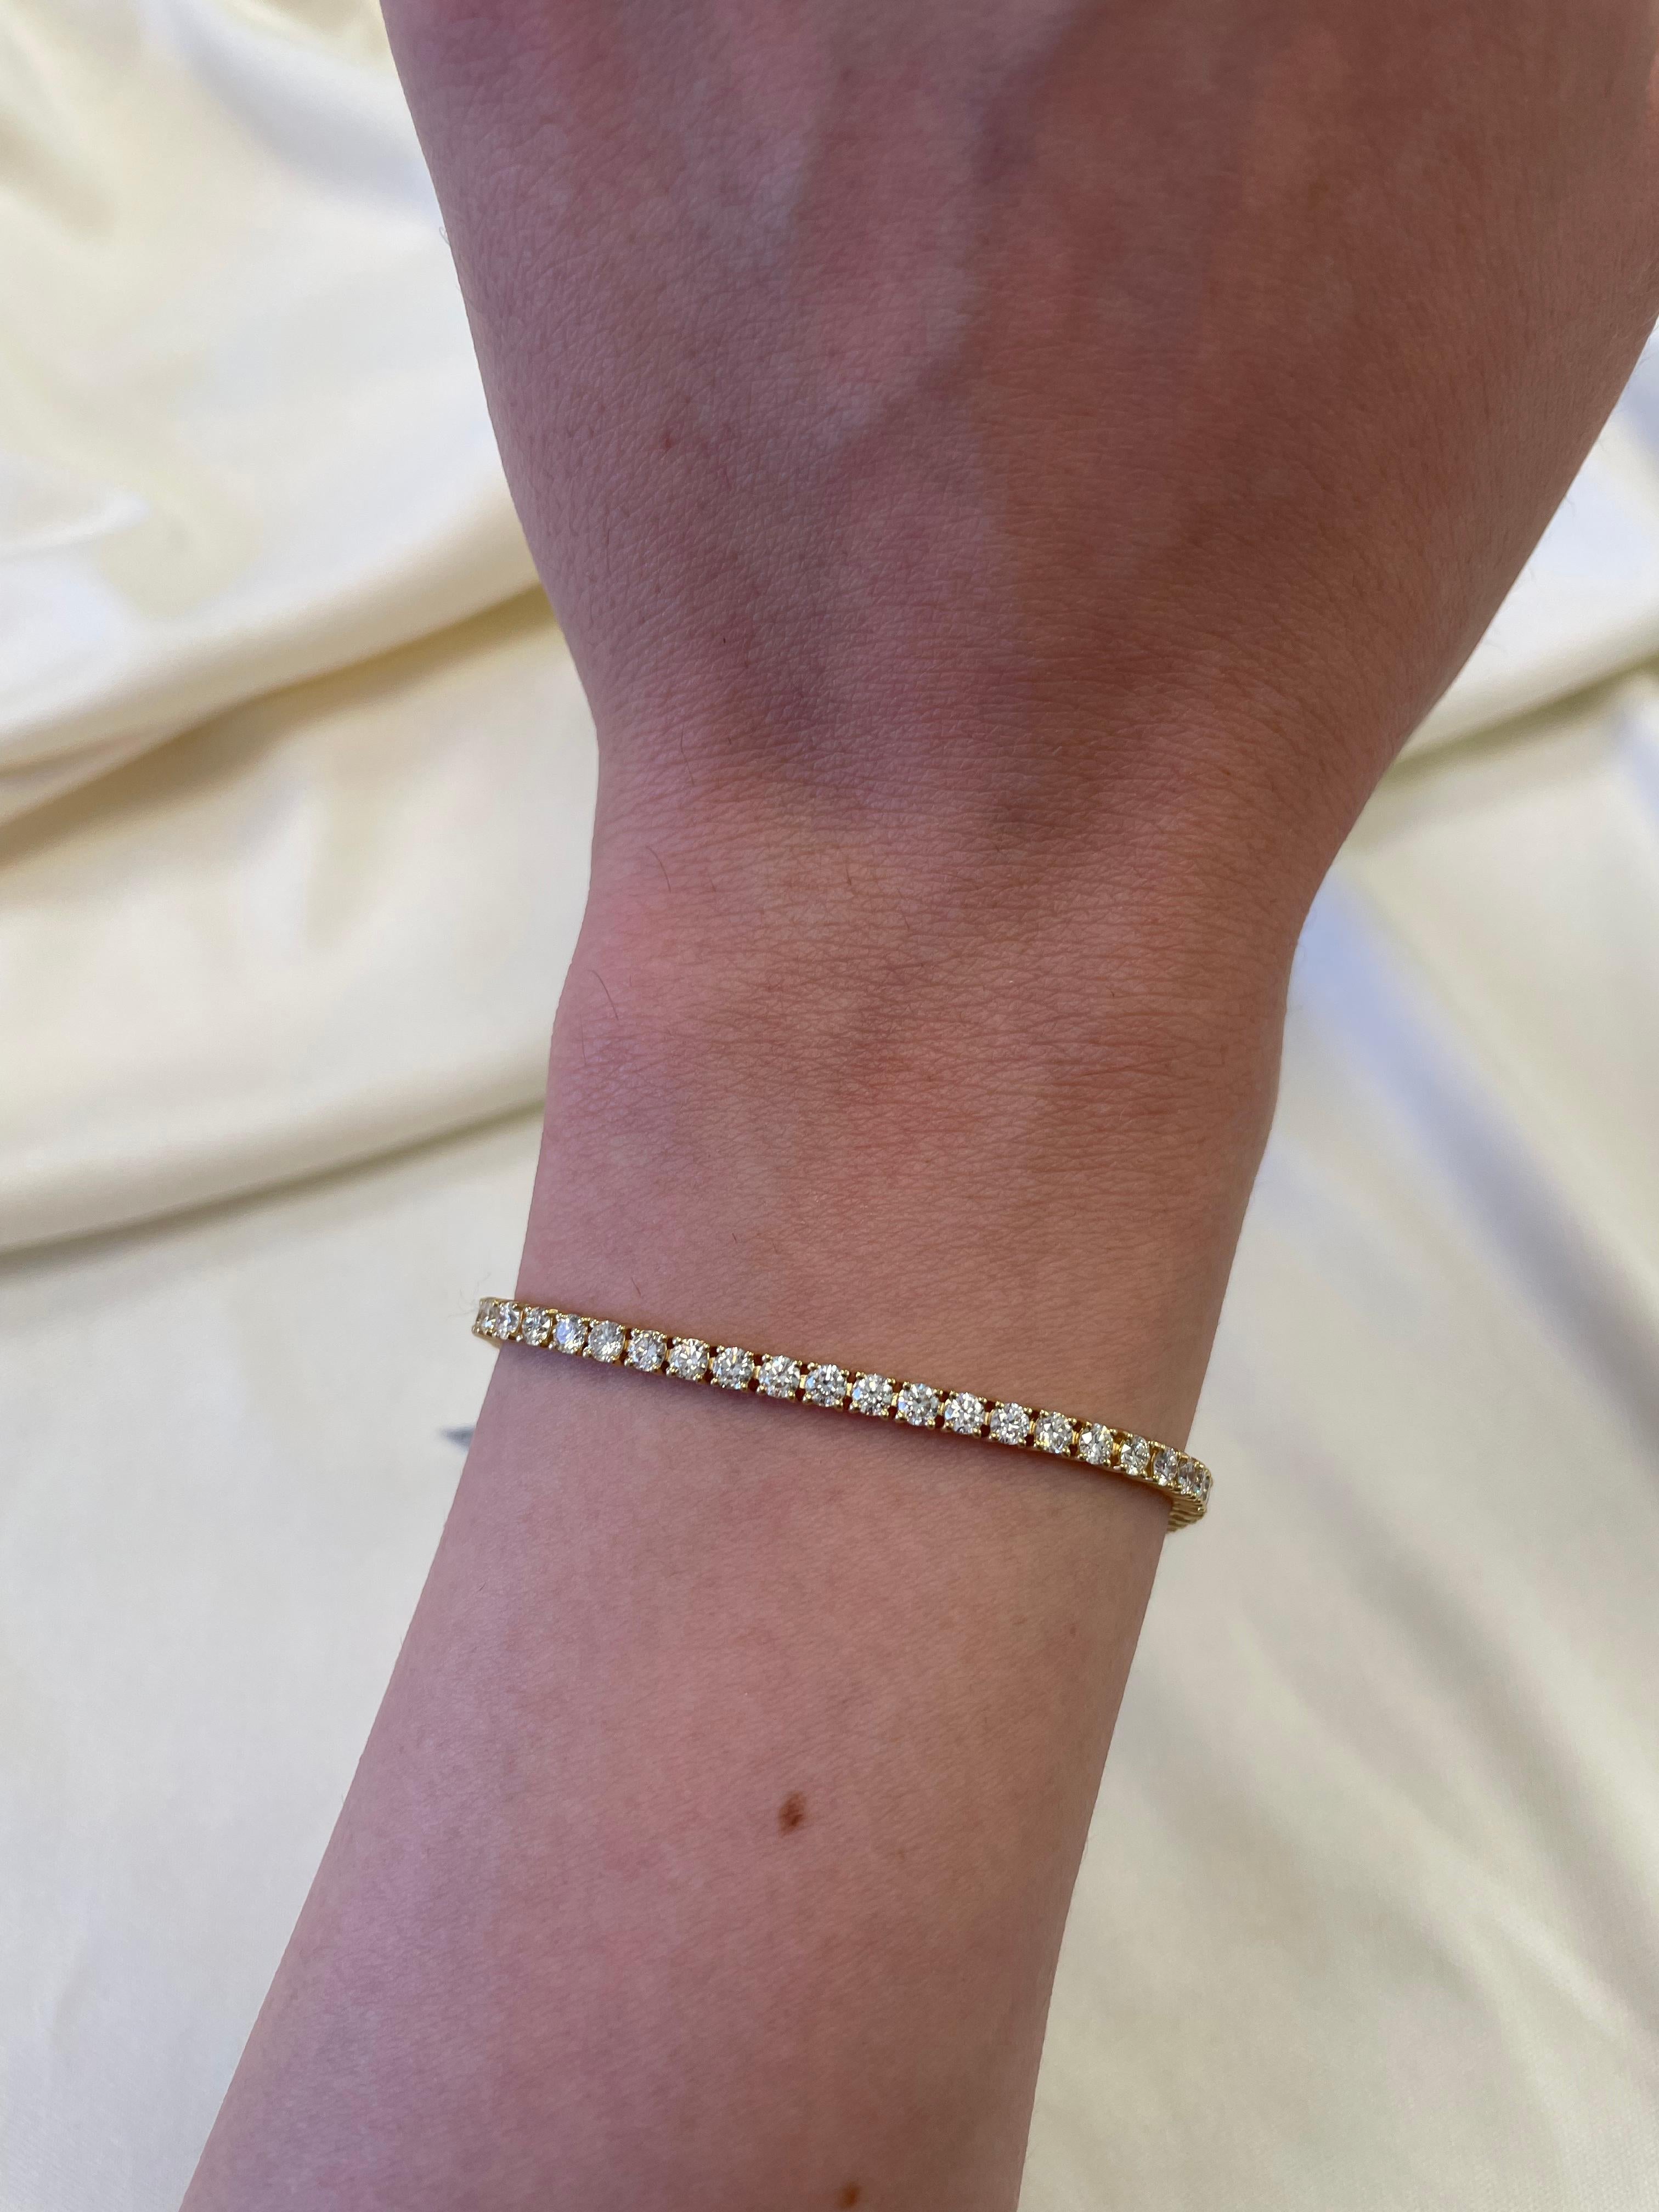 Exquisite and timeless diamonds tennis bracelet, by Alexander Beverly Hills.
65 round brilliant diamonds, 3.63 carats total. Approximately H/I color and VS clarity. Four prong set in 18k yellow gold, 8.49 grams, 7 inches. 
Accommodated with an